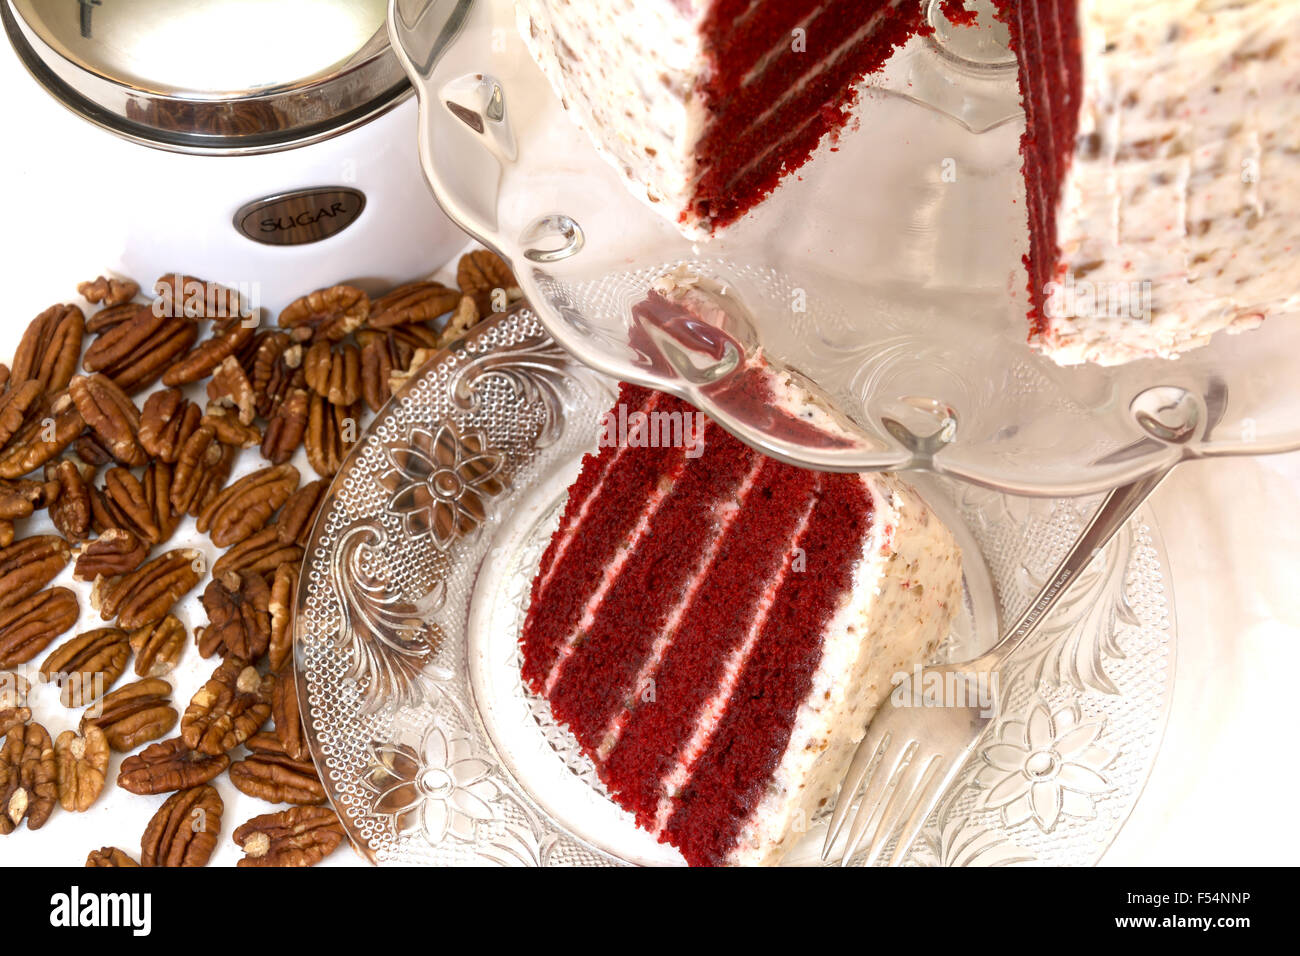 Slice of red velvet cake and pecans with sugar canister in background.  Slice is removed from whole cake which is in background. Stock Photo